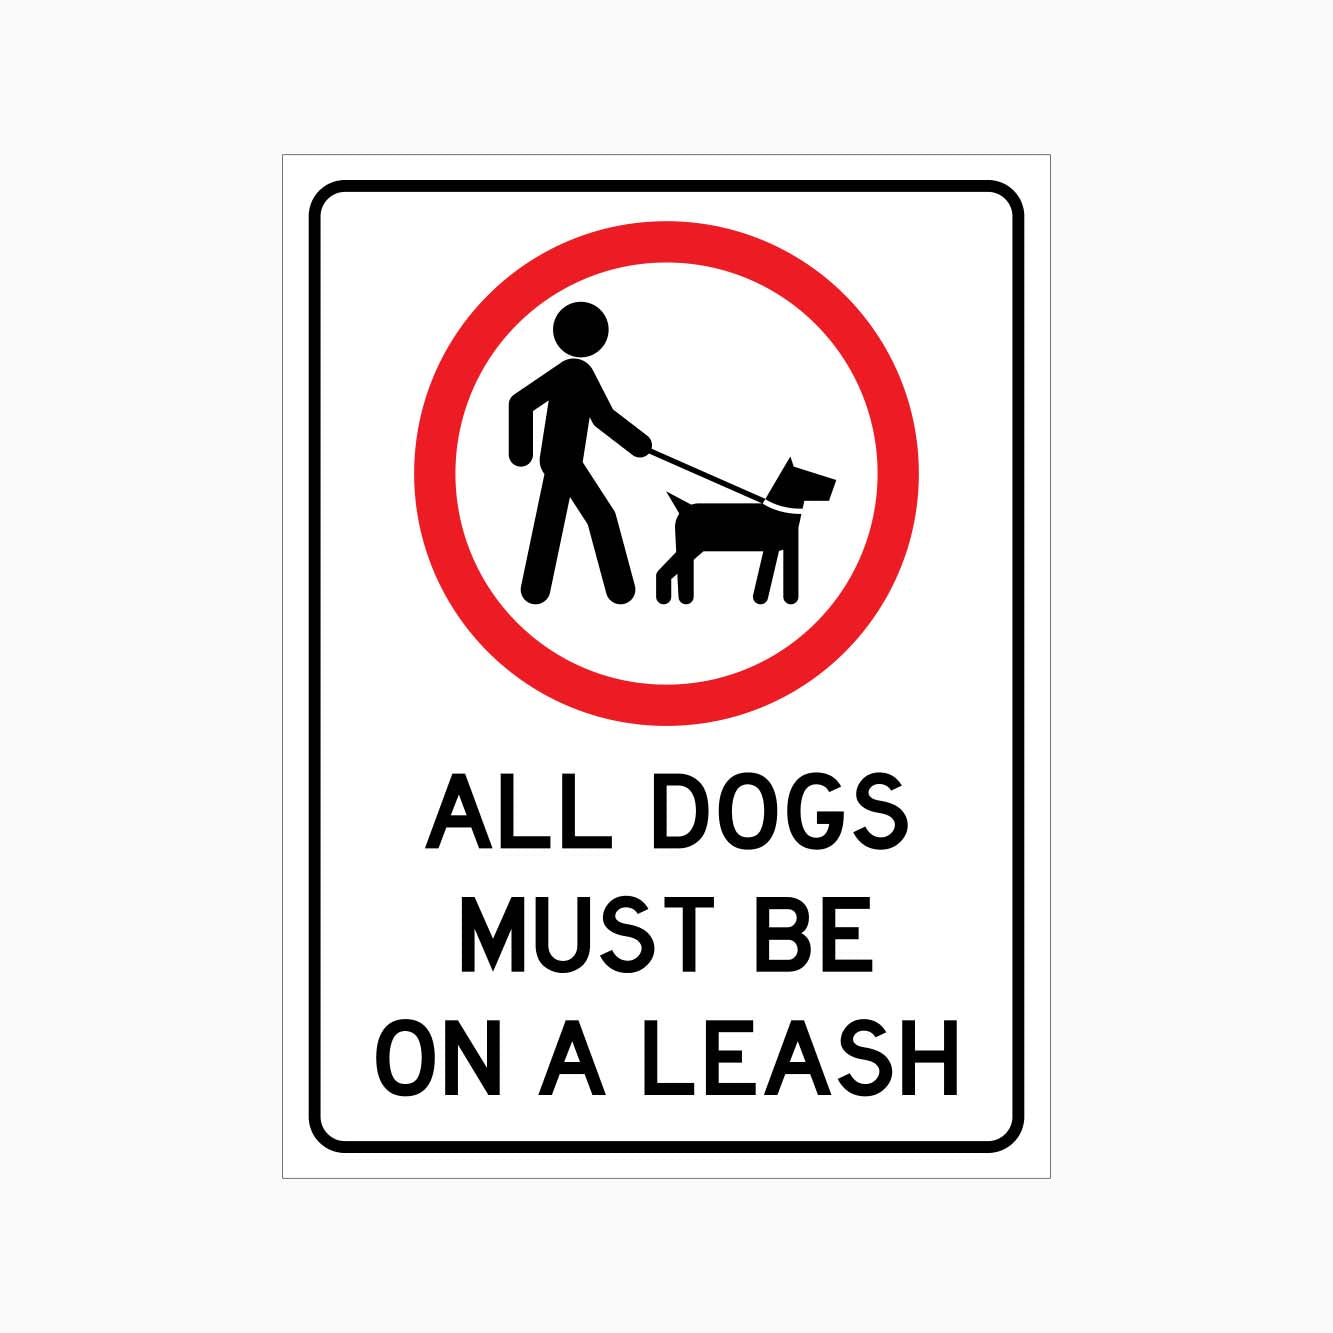 ALL DOGS MUST BE ON A LEASH SIGN - GET SIGNS